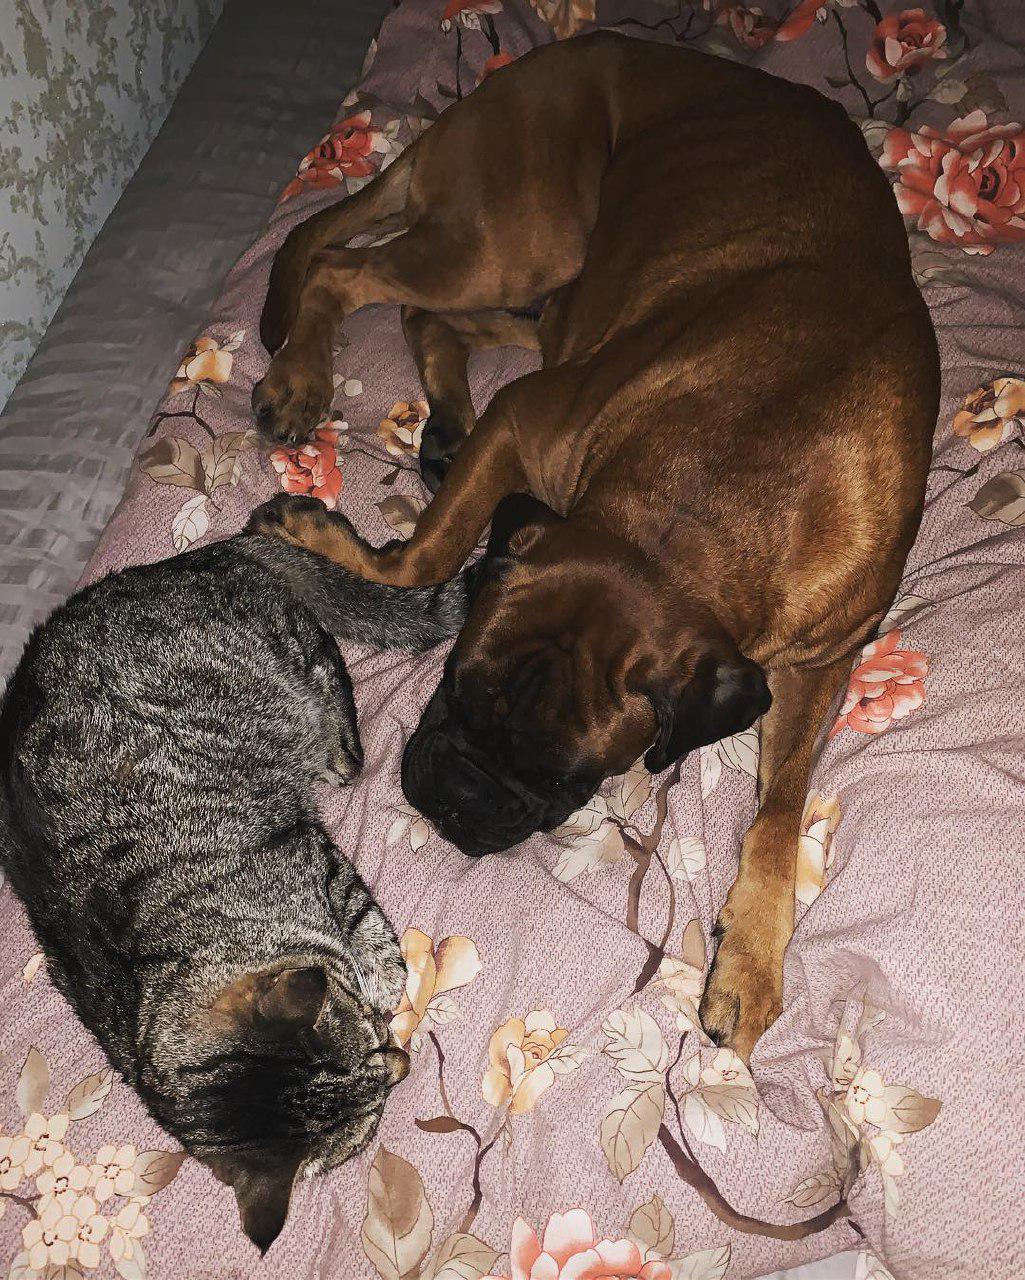 A Boxer dog sleeping on the bed together with a cat